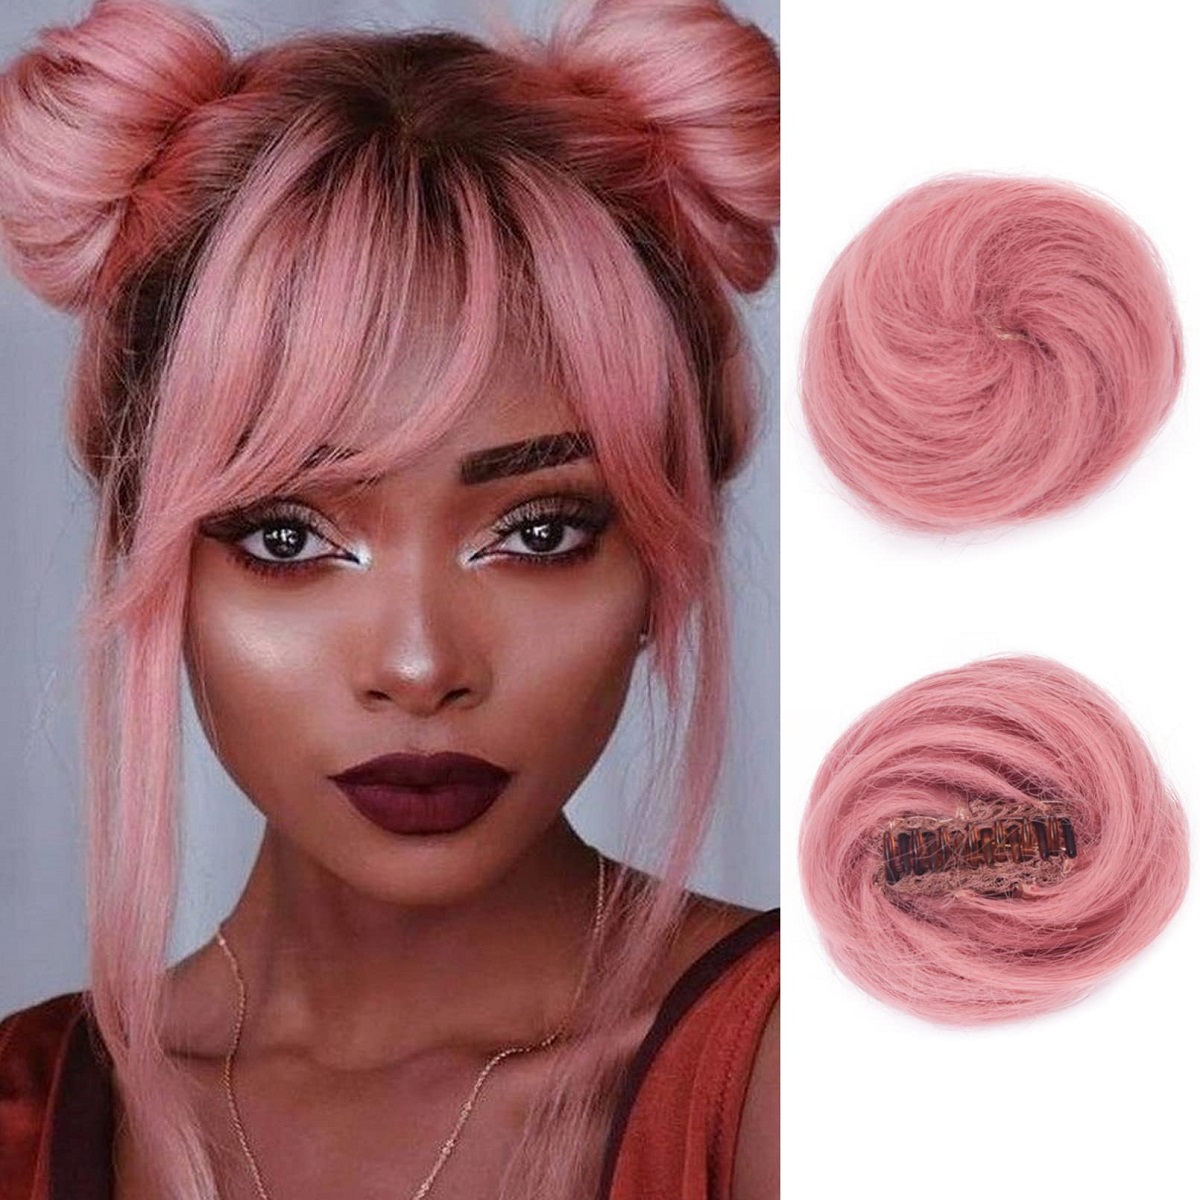 Coral Space Buns